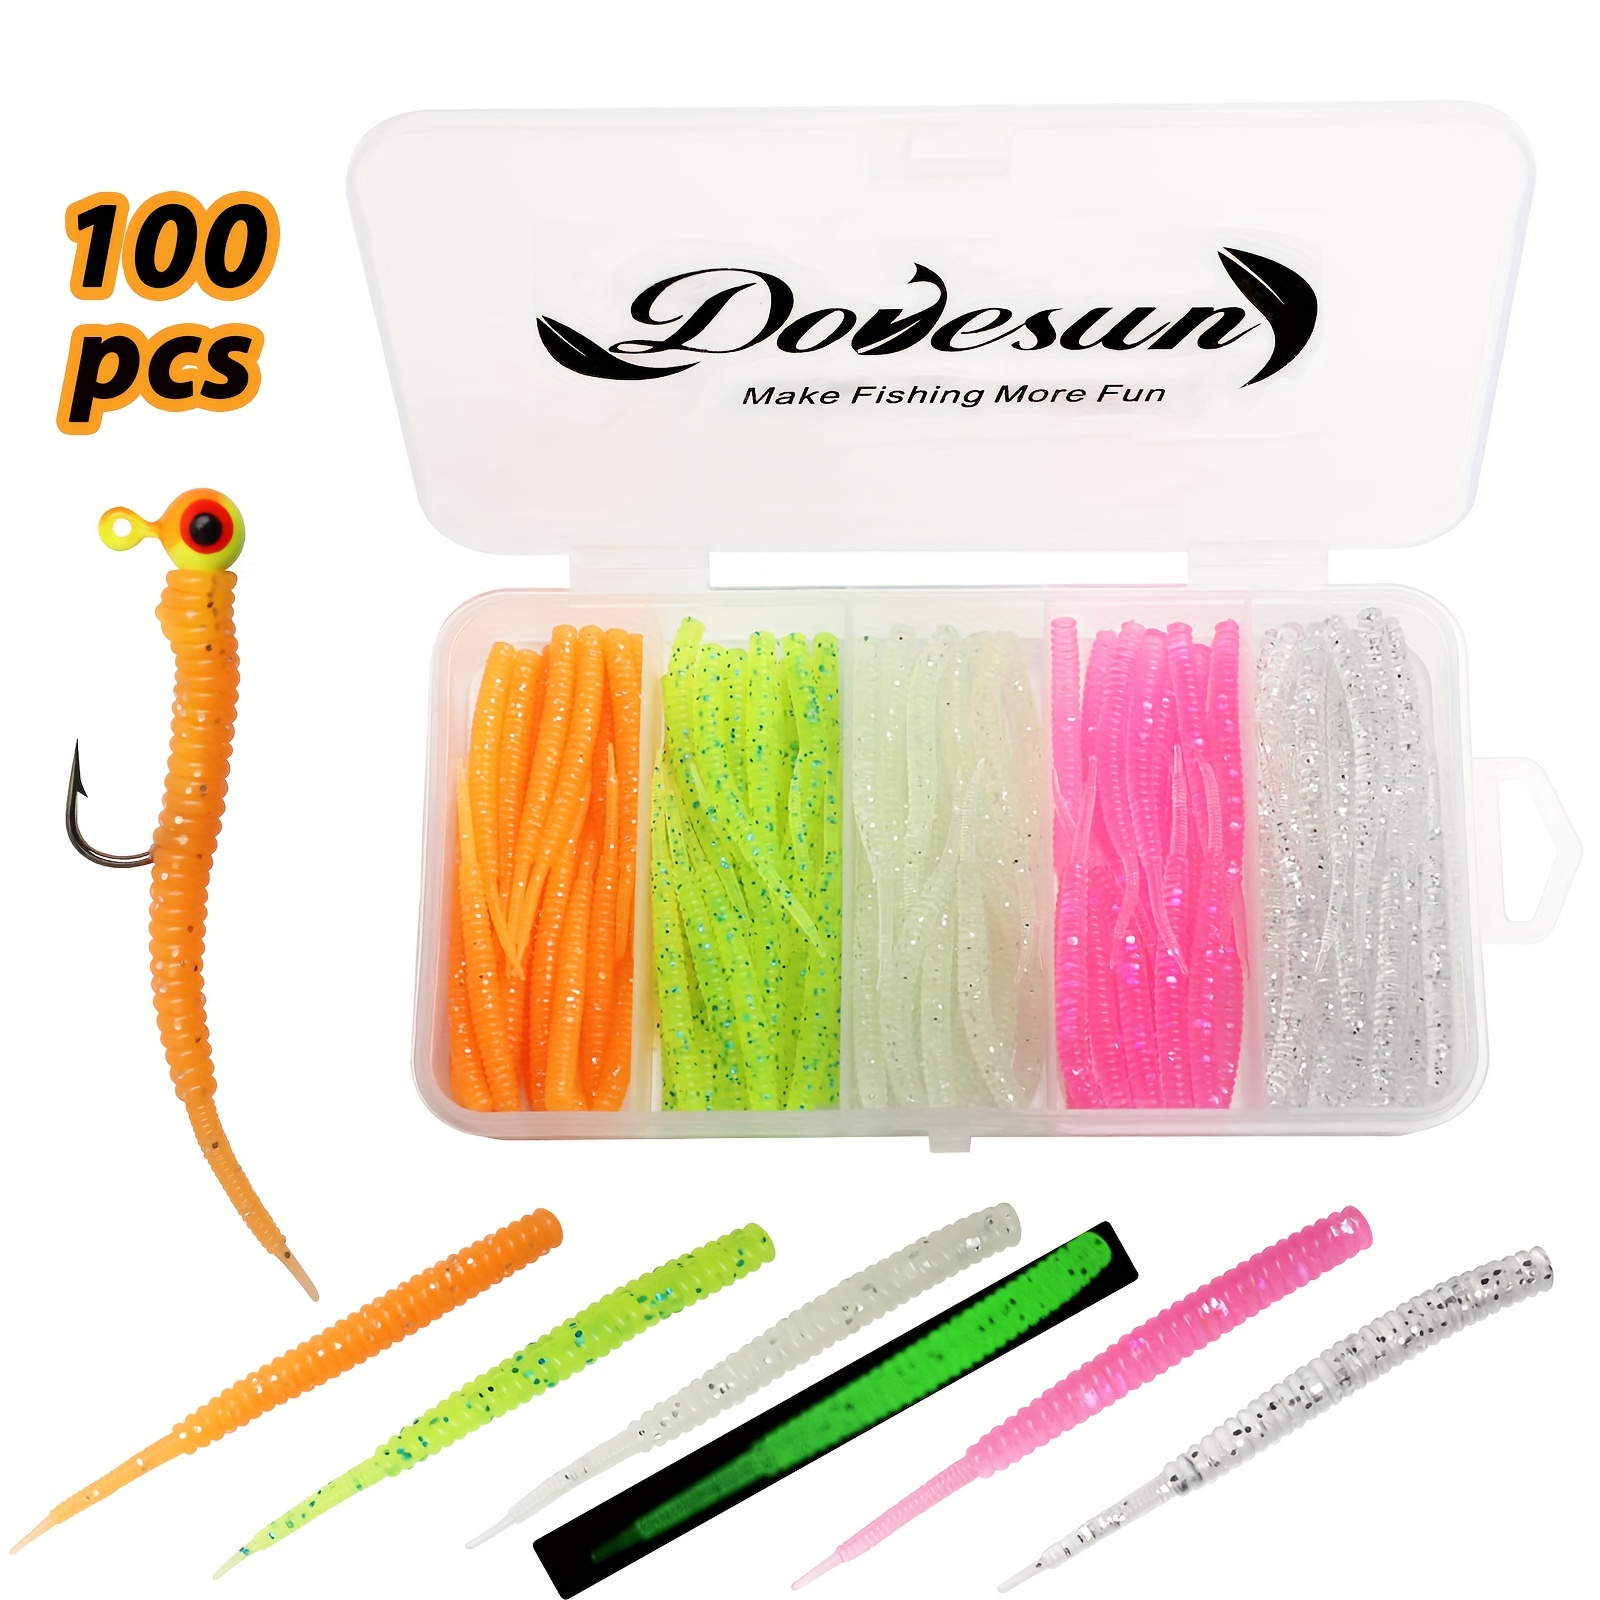 Spinpoler 100pcs Soft Plastic Fishing Lures Worms Bait Plastic Micro Tail  Drop Shot Ice Fishing For Perch Pike Trout Chub Tackle